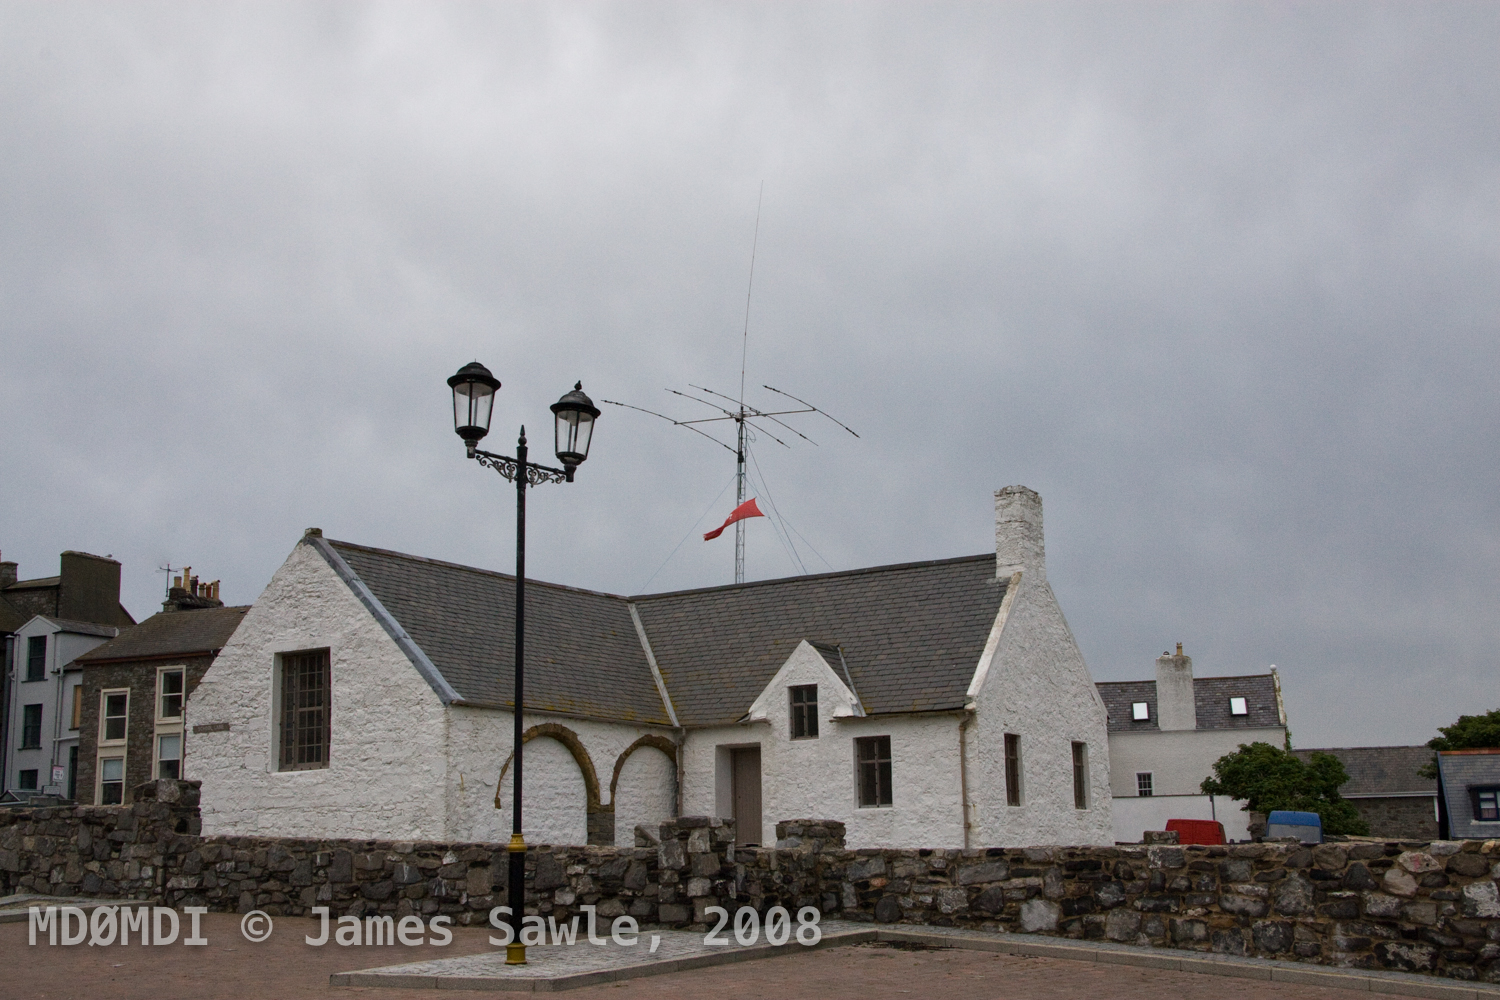 Dull and Windy was the best we could expect for operation GB4MNH from the Old Grammar School in Castletown